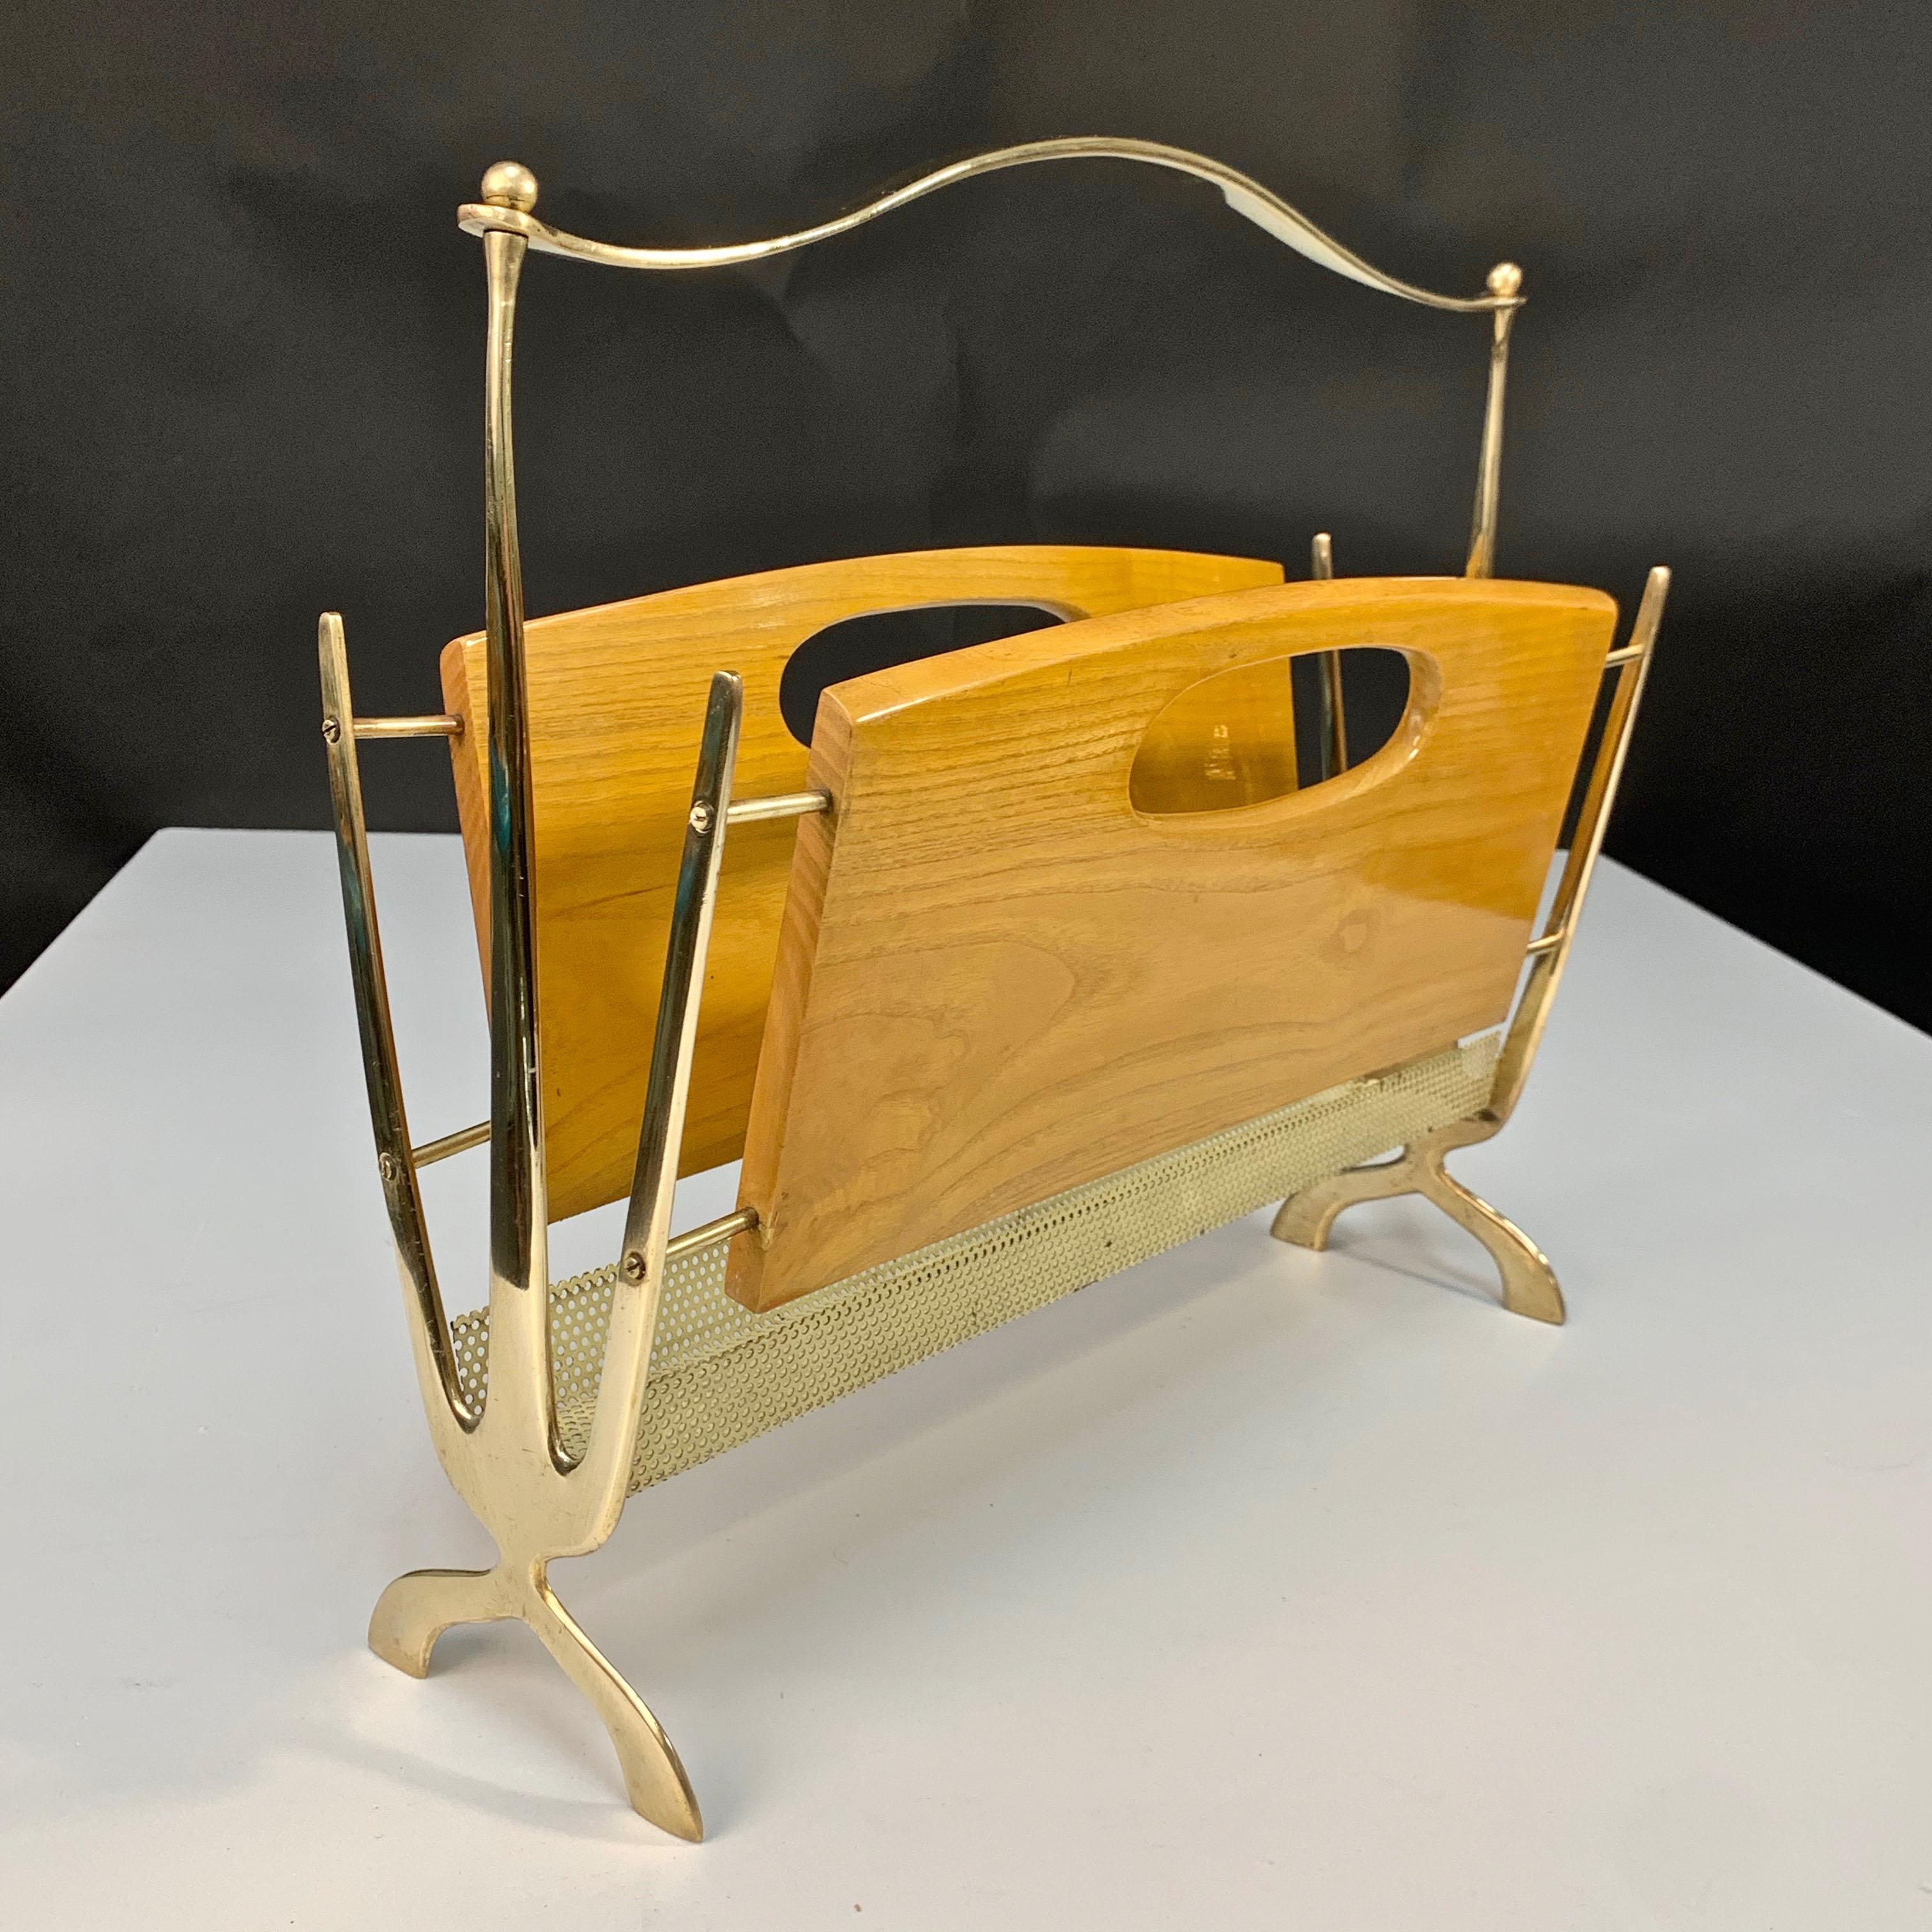 Maison Baguès Midcentury Brass and Chestnut Wood French Magazine Rack, 1950s For Sale 7